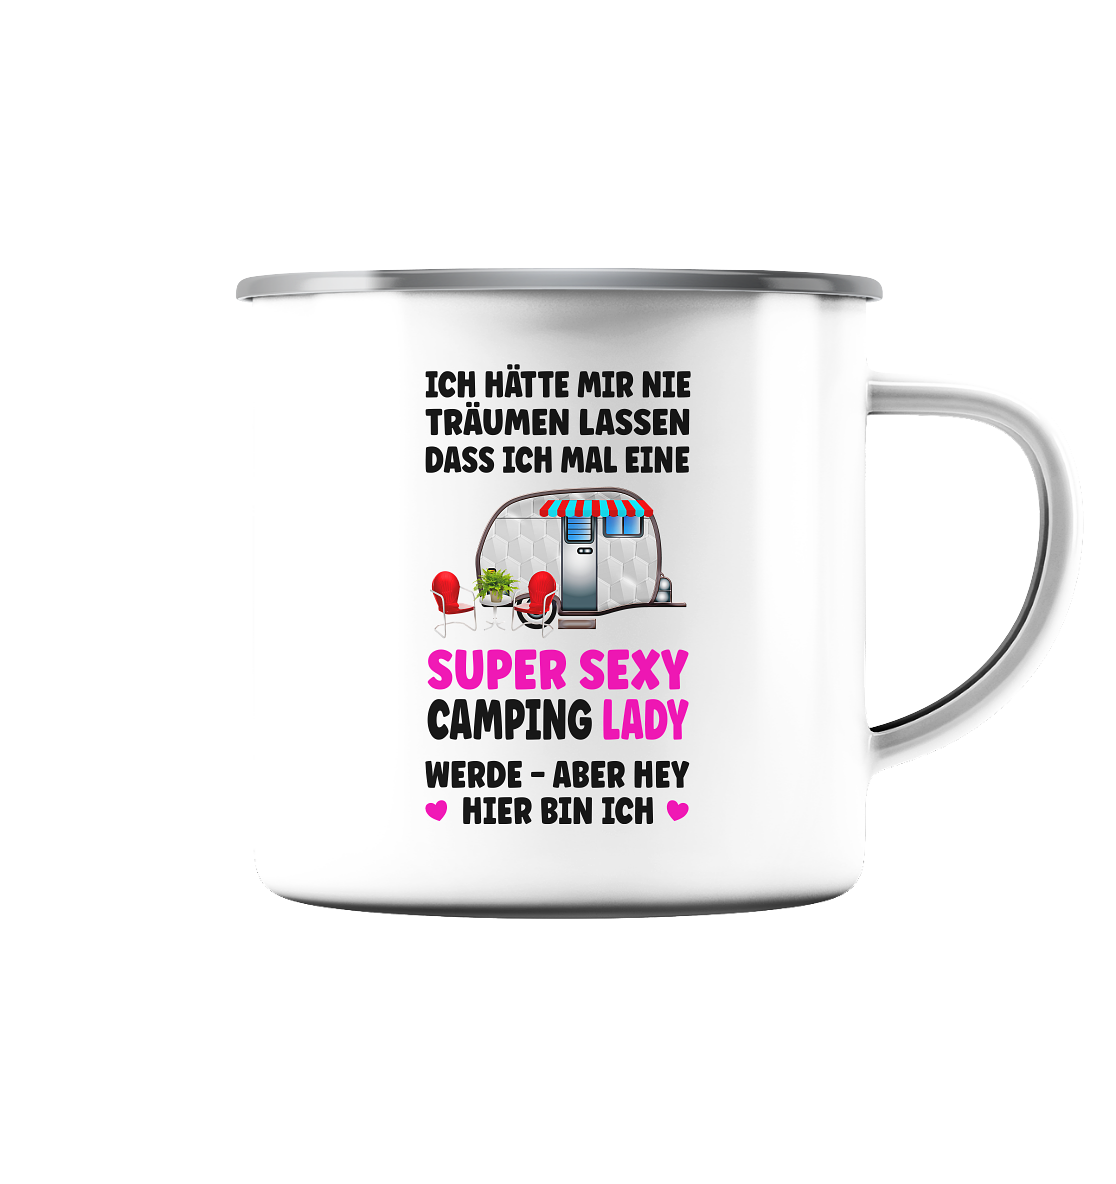 Super Sexy Camping Lady - Emaille Tasse (Silber)